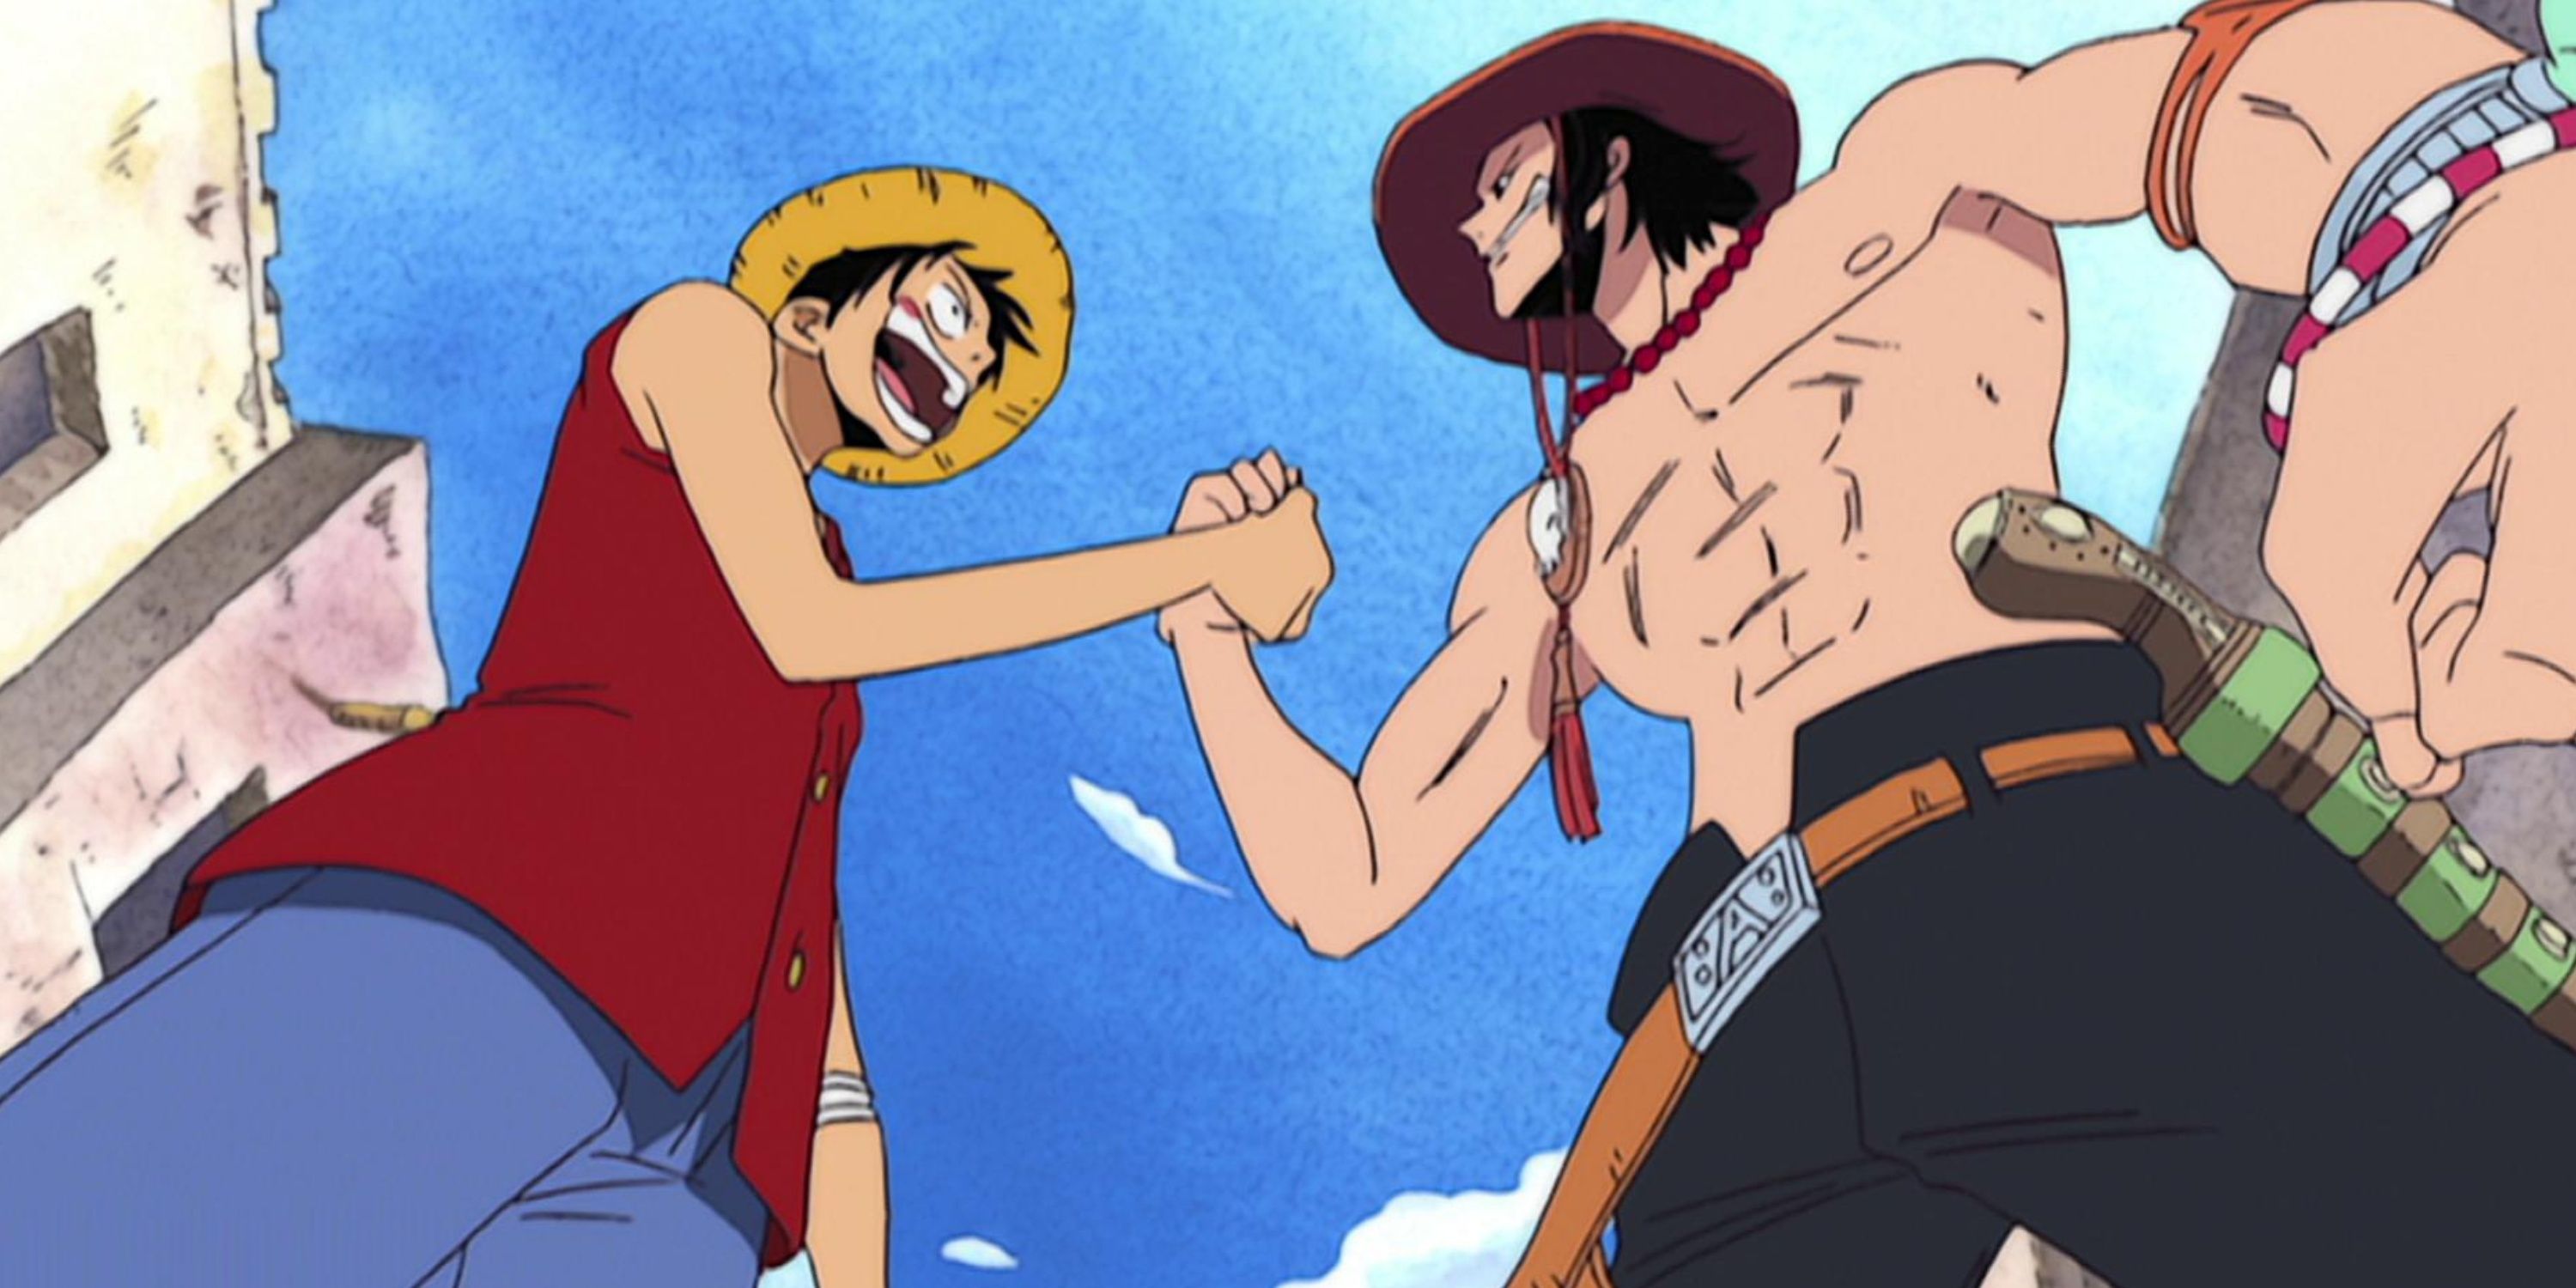 Monkey D. Luffy clasps hands with Portgas D. Ace during One Piece's Alabasta Arc